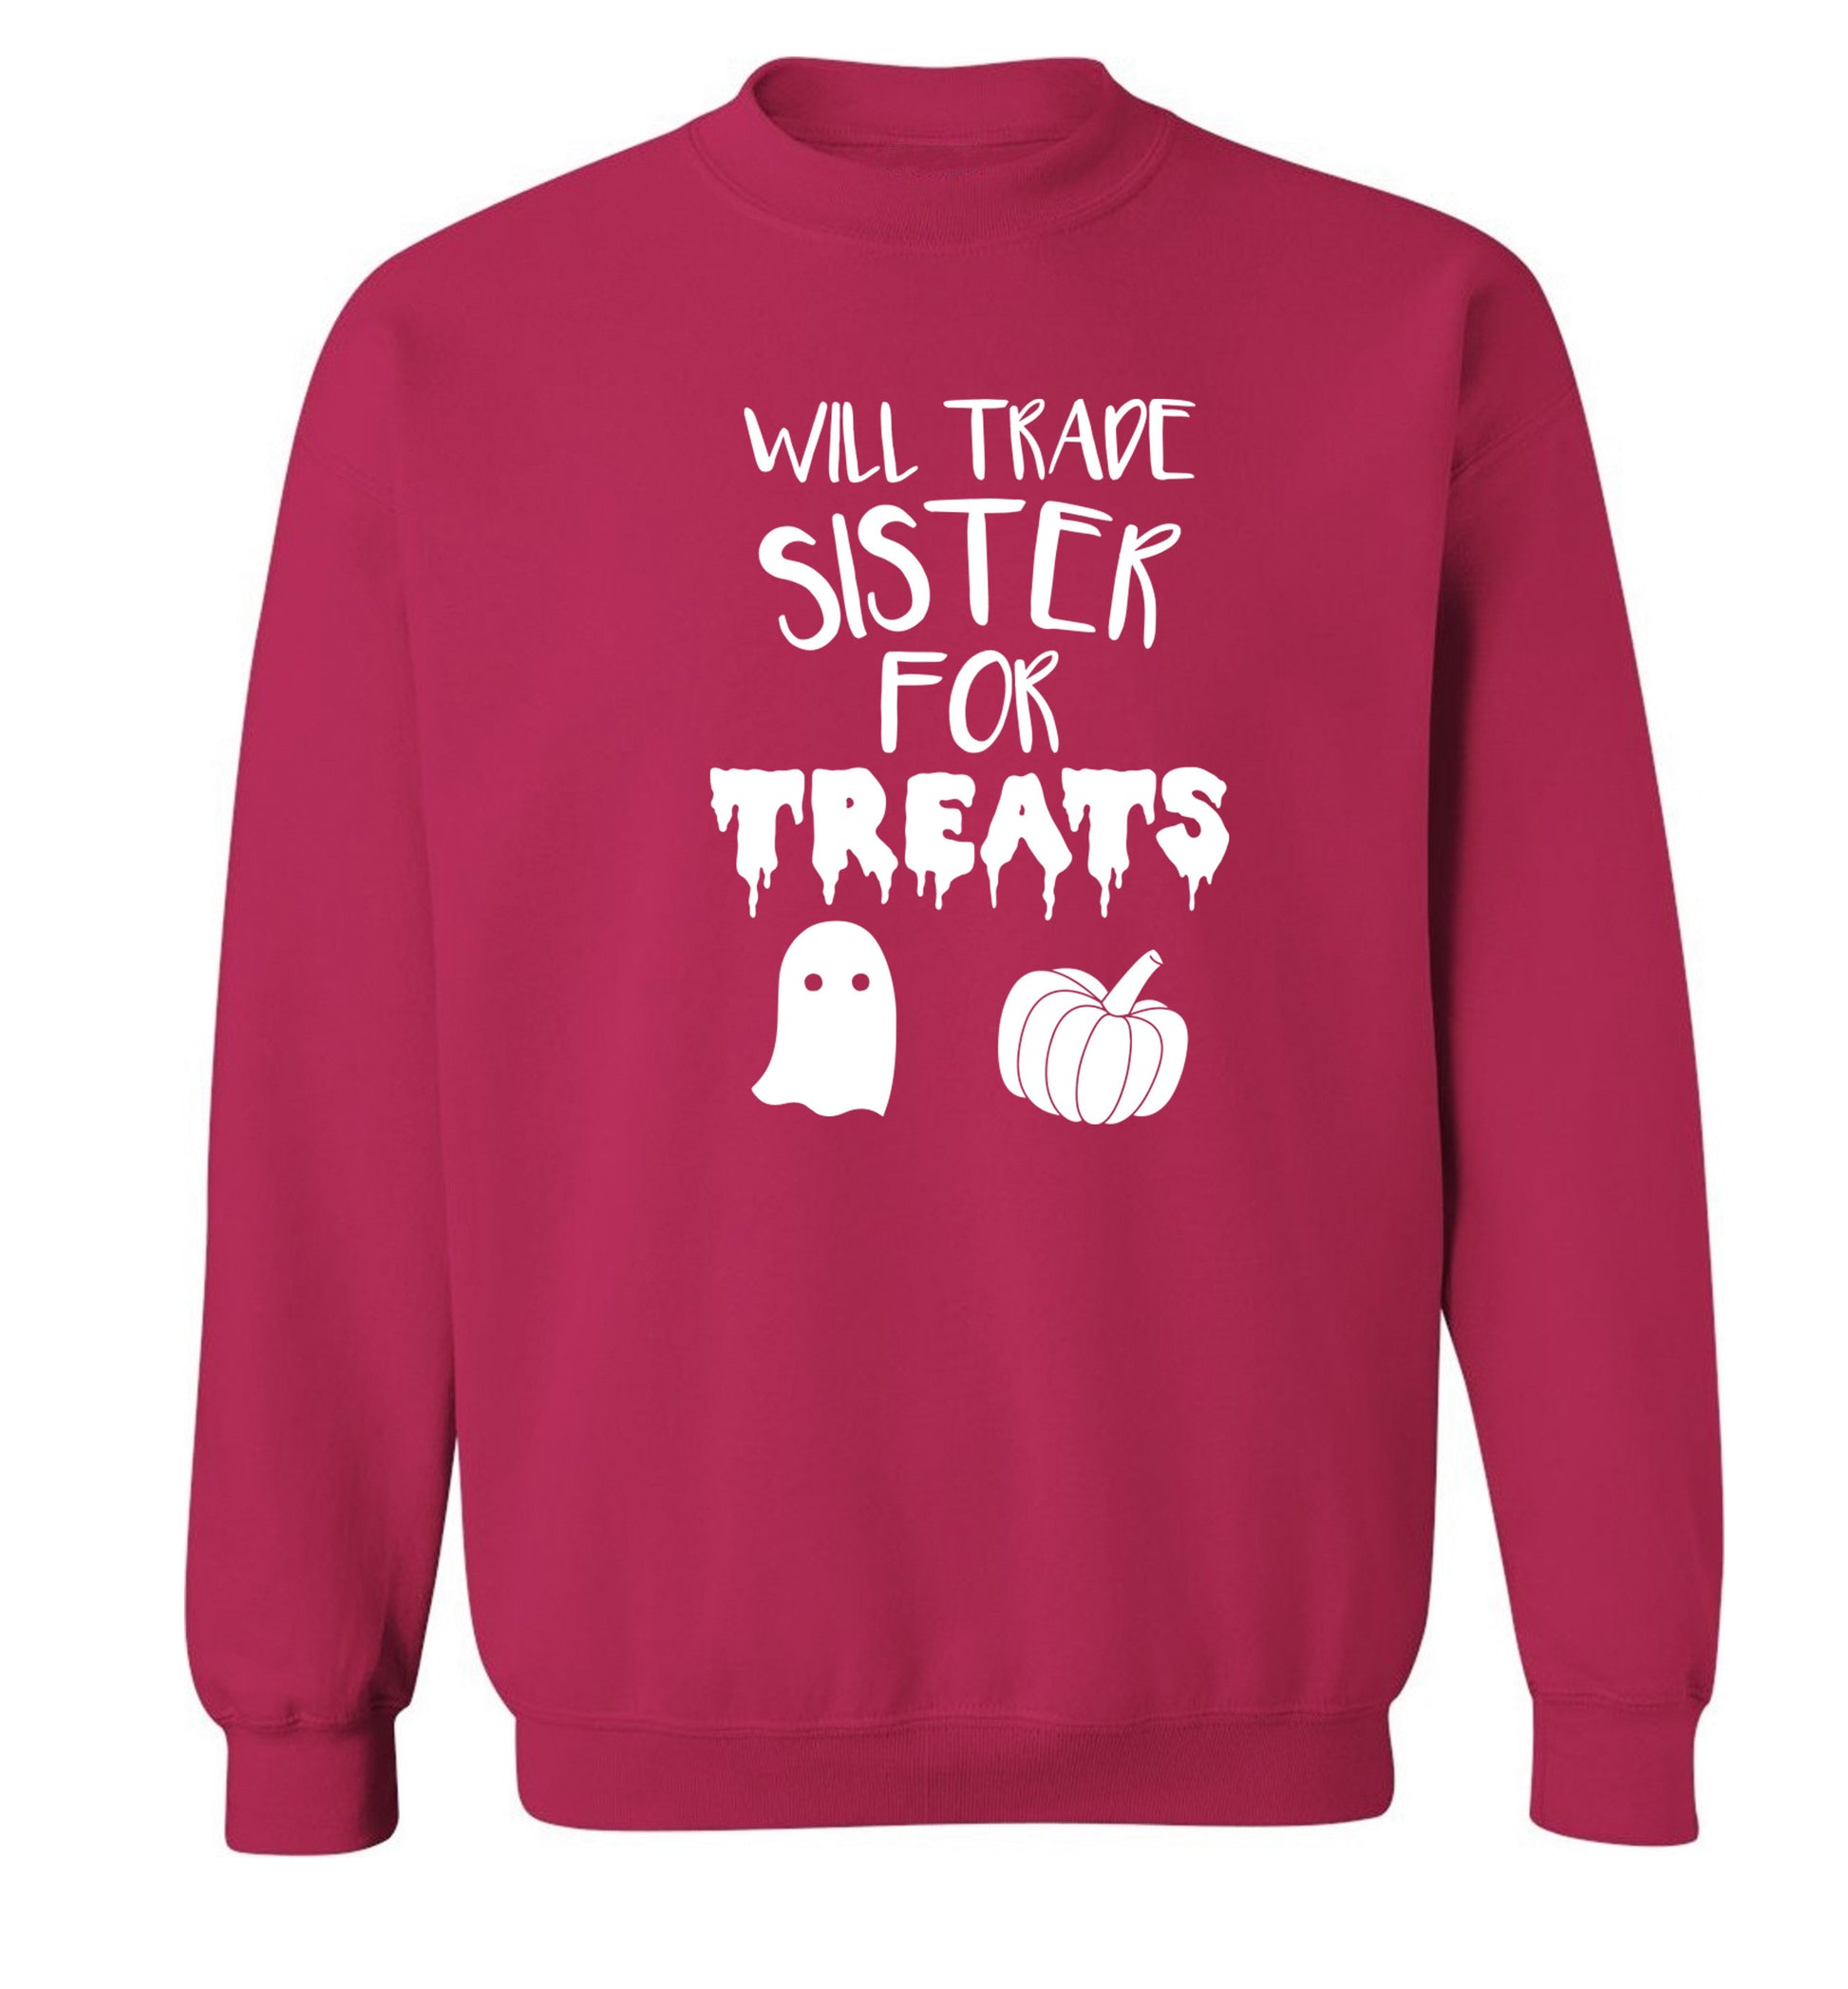 Will trade sister for treats Adult's unisex pink Sweater 2XL